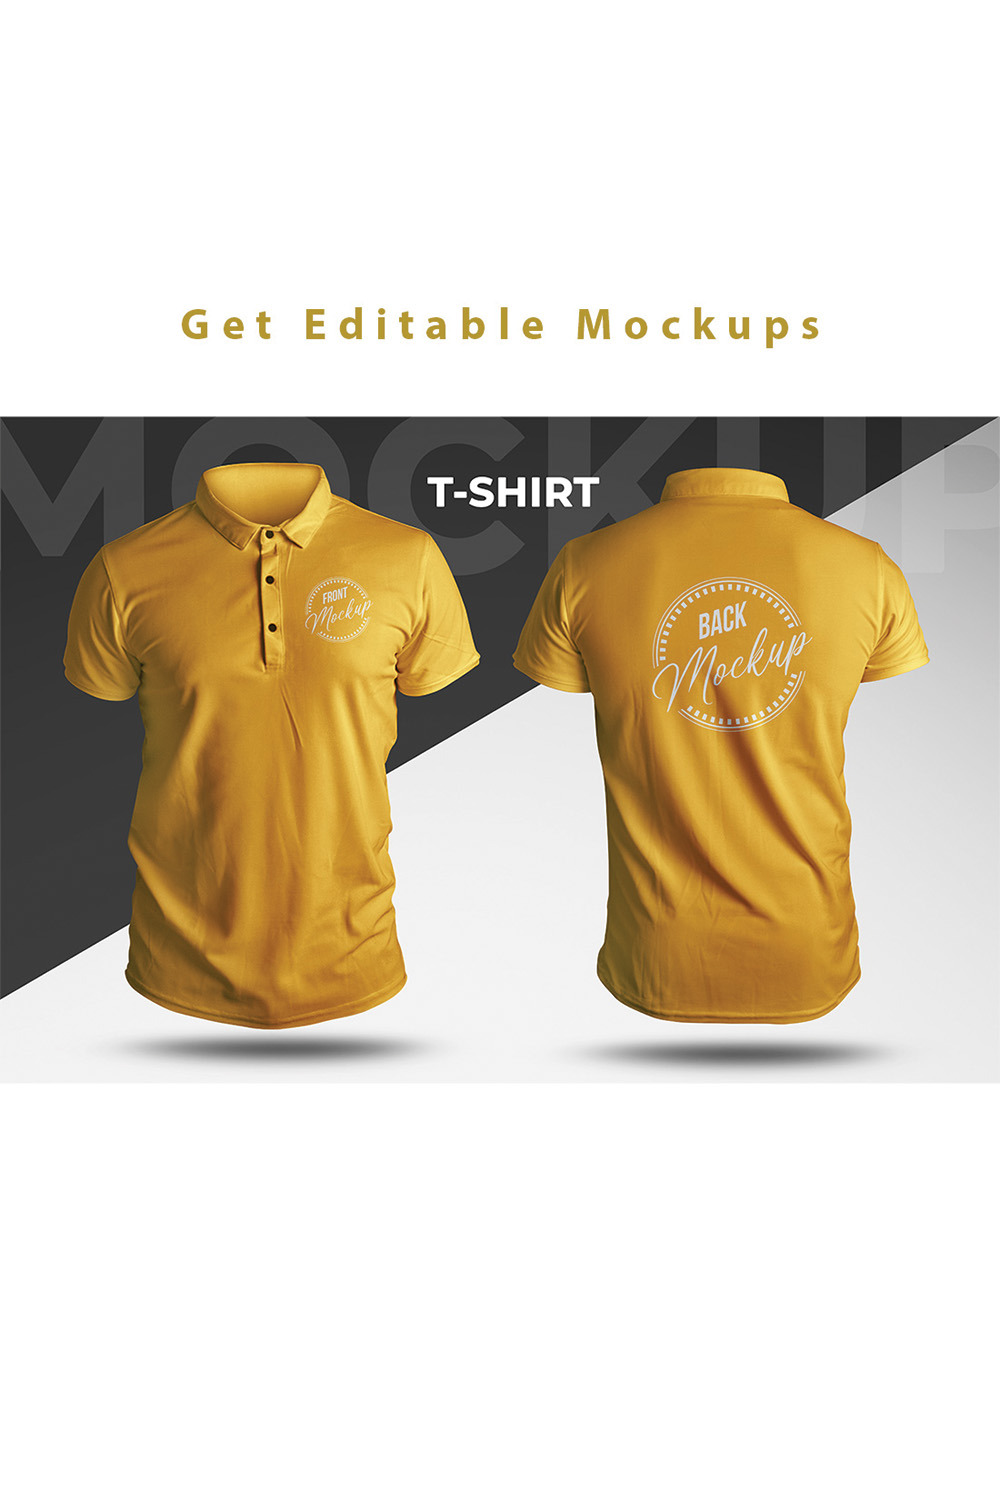 T- Shirt Front Back Mockup- High resolution Editable PSD file pinterest preview image.